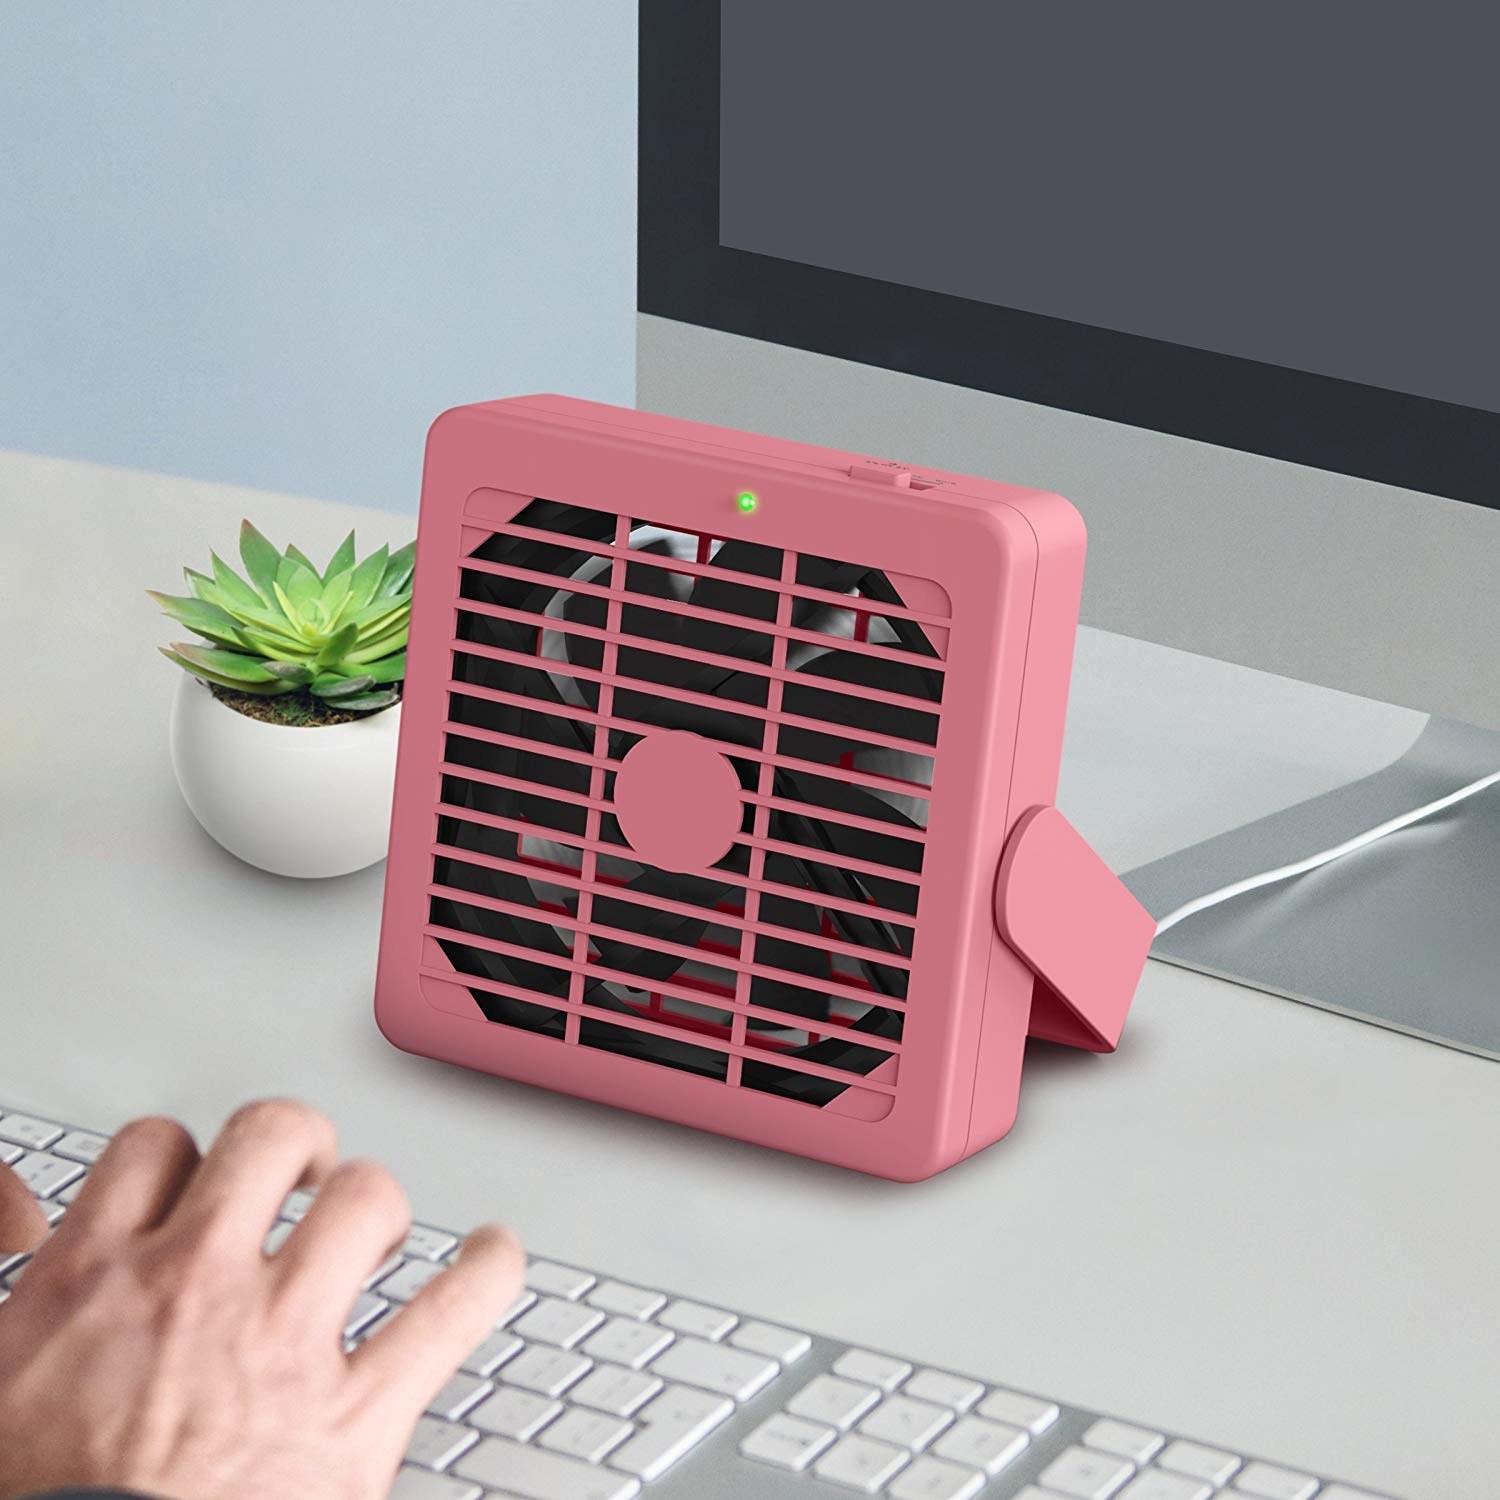 A small square-shaped pink fan on a desk 